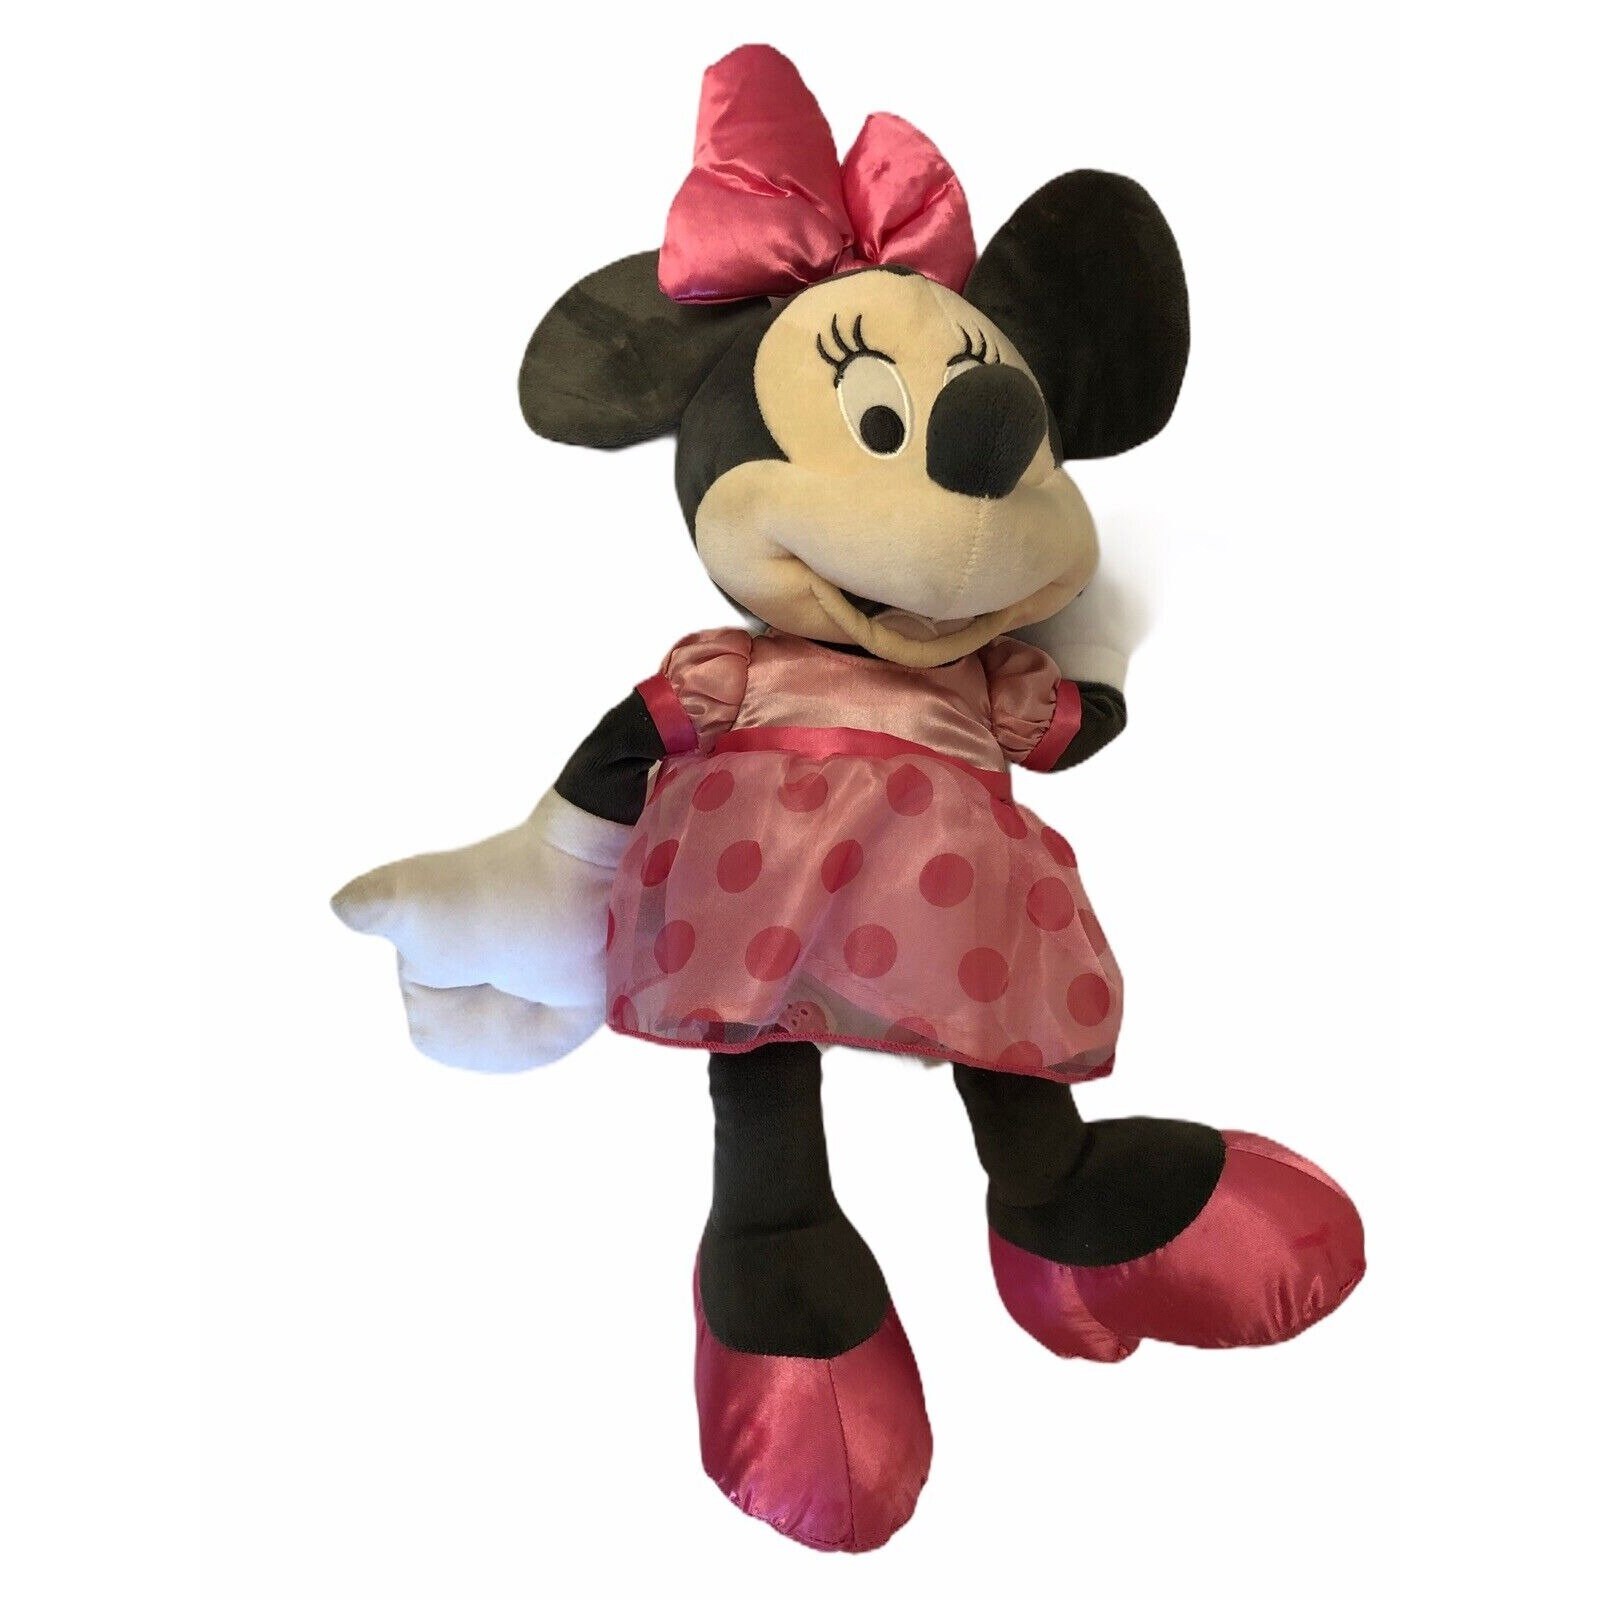 Buy 18 Inch Doll Minnie Mouse Online In India -  India